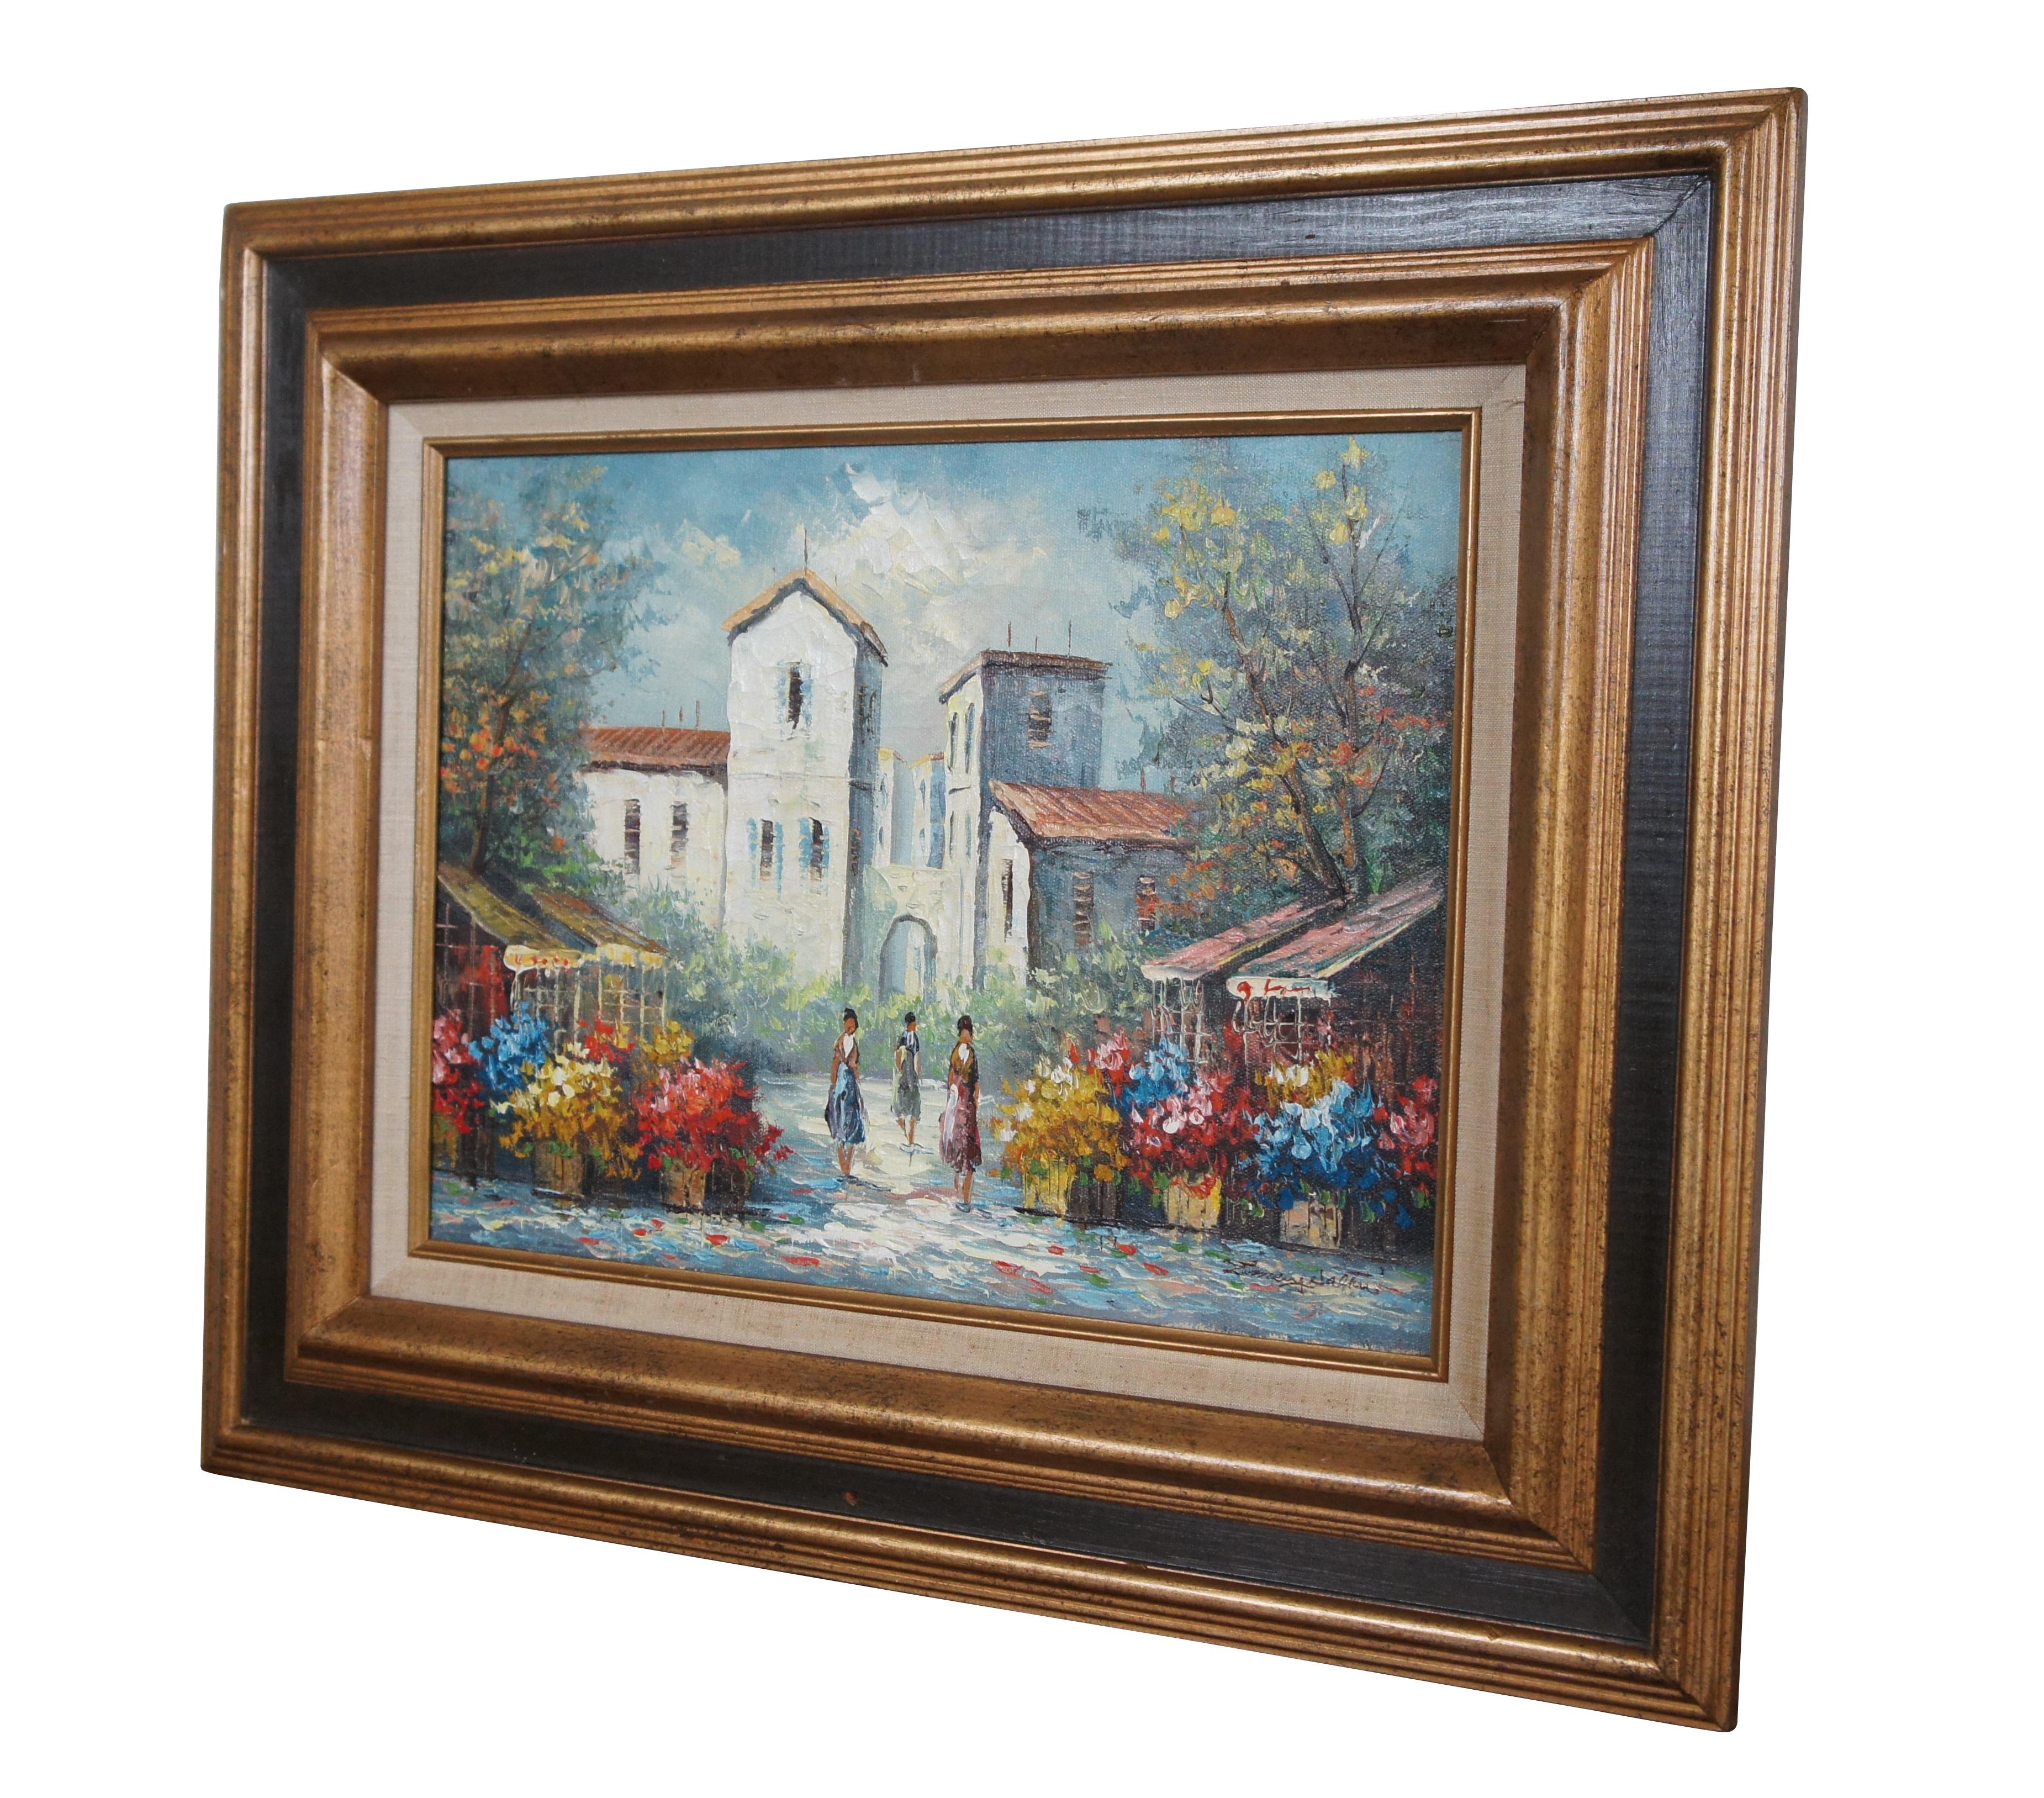 A lovely painting of a Spanish villa with figures and flowers.  Features a beautiful stucco home with clay tiled roof.  3 Figures are in the foreground between flowers.  The painting is signed lower right.

Dimensions:
23.75